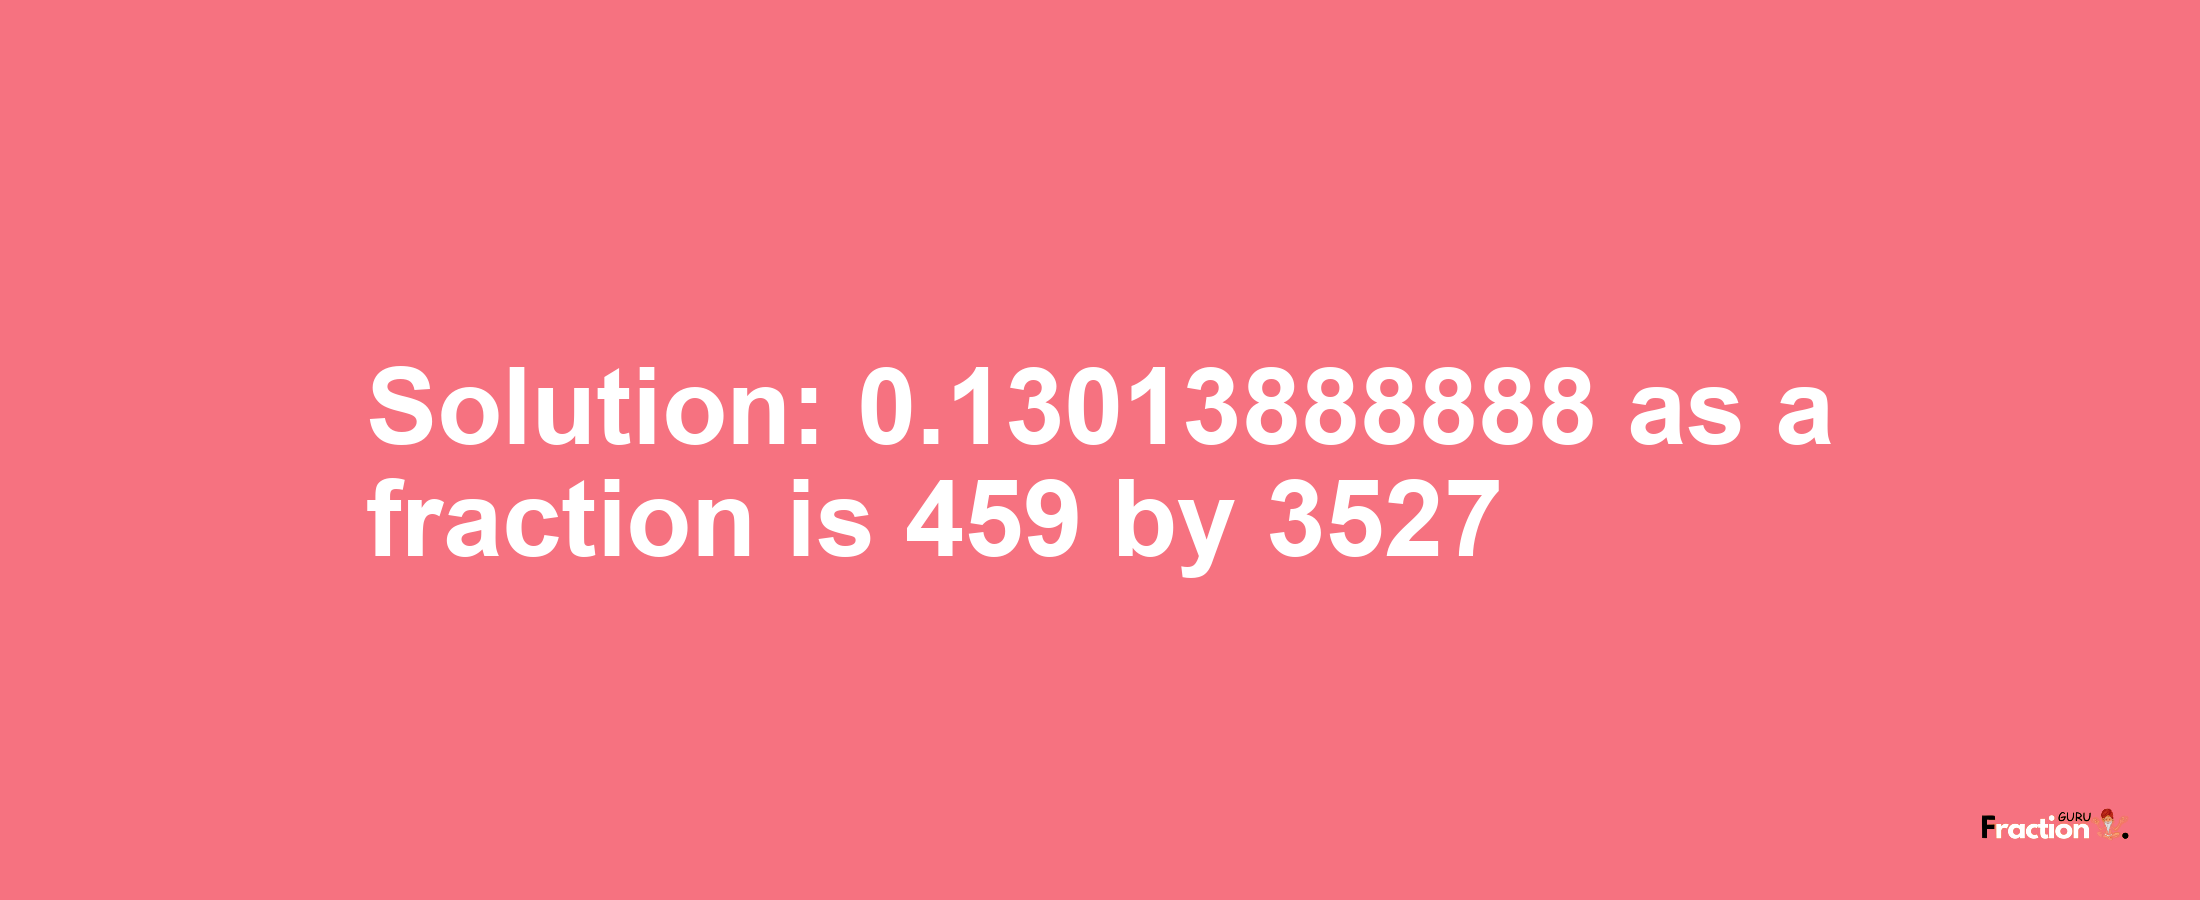 Solution:0.13013888888 as a fraction is 459/3527